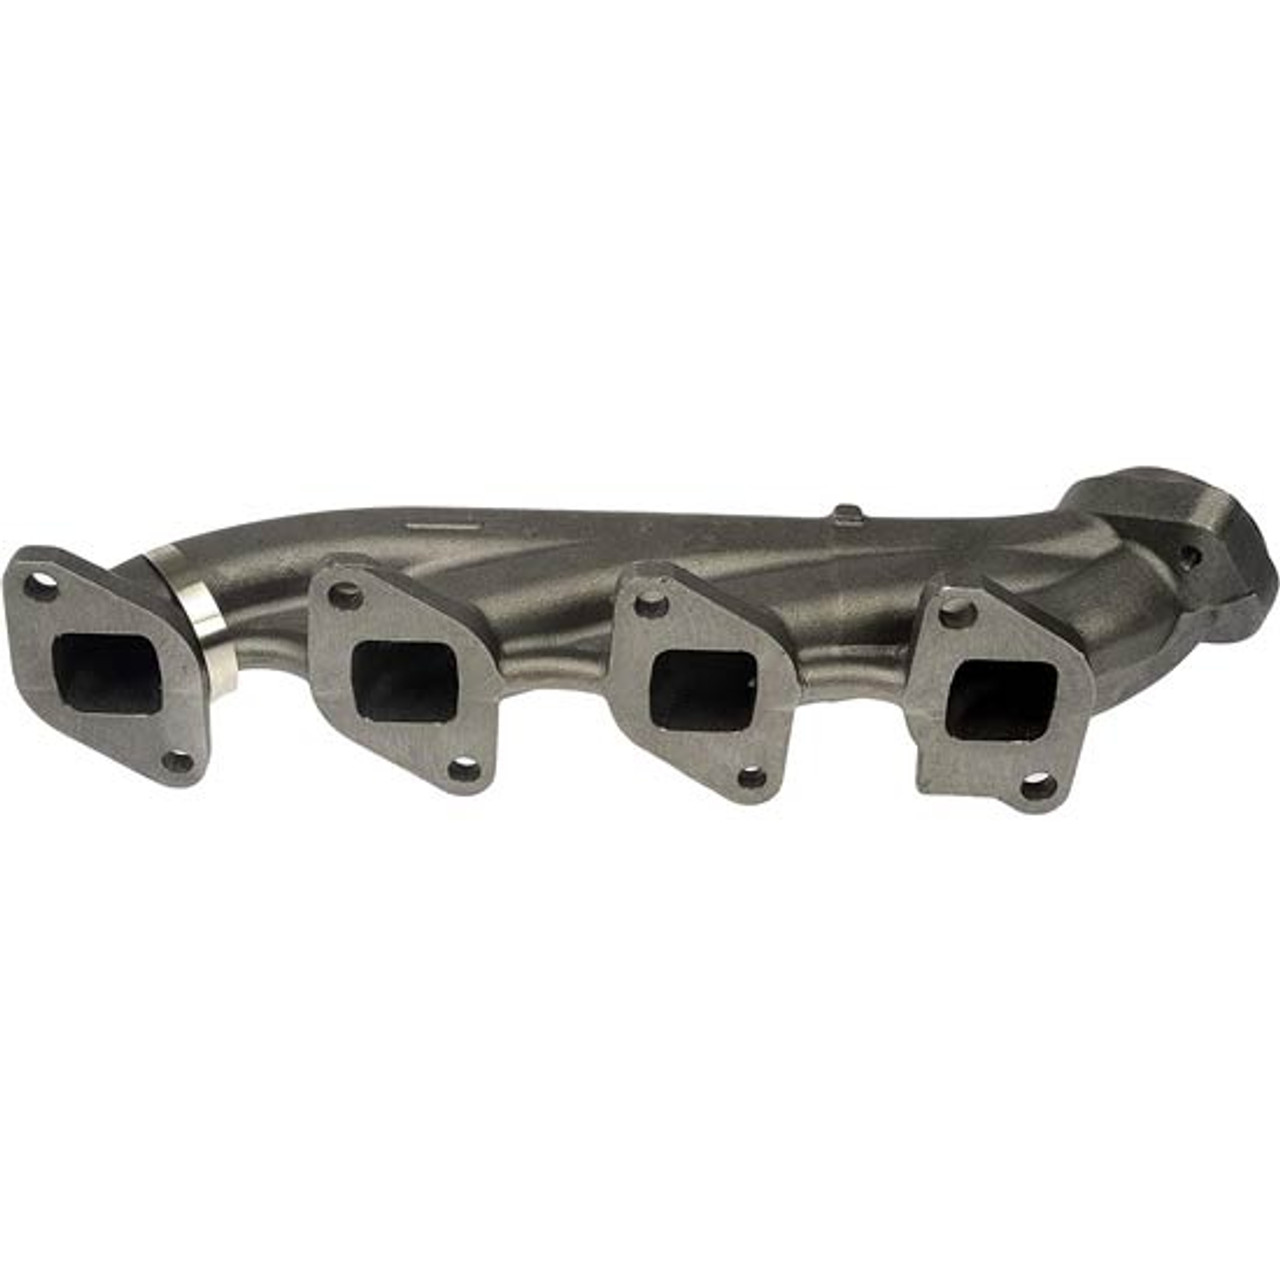 Exhaust Manifold Kit Replaces BC3Z9431DA For Ford State Trucks